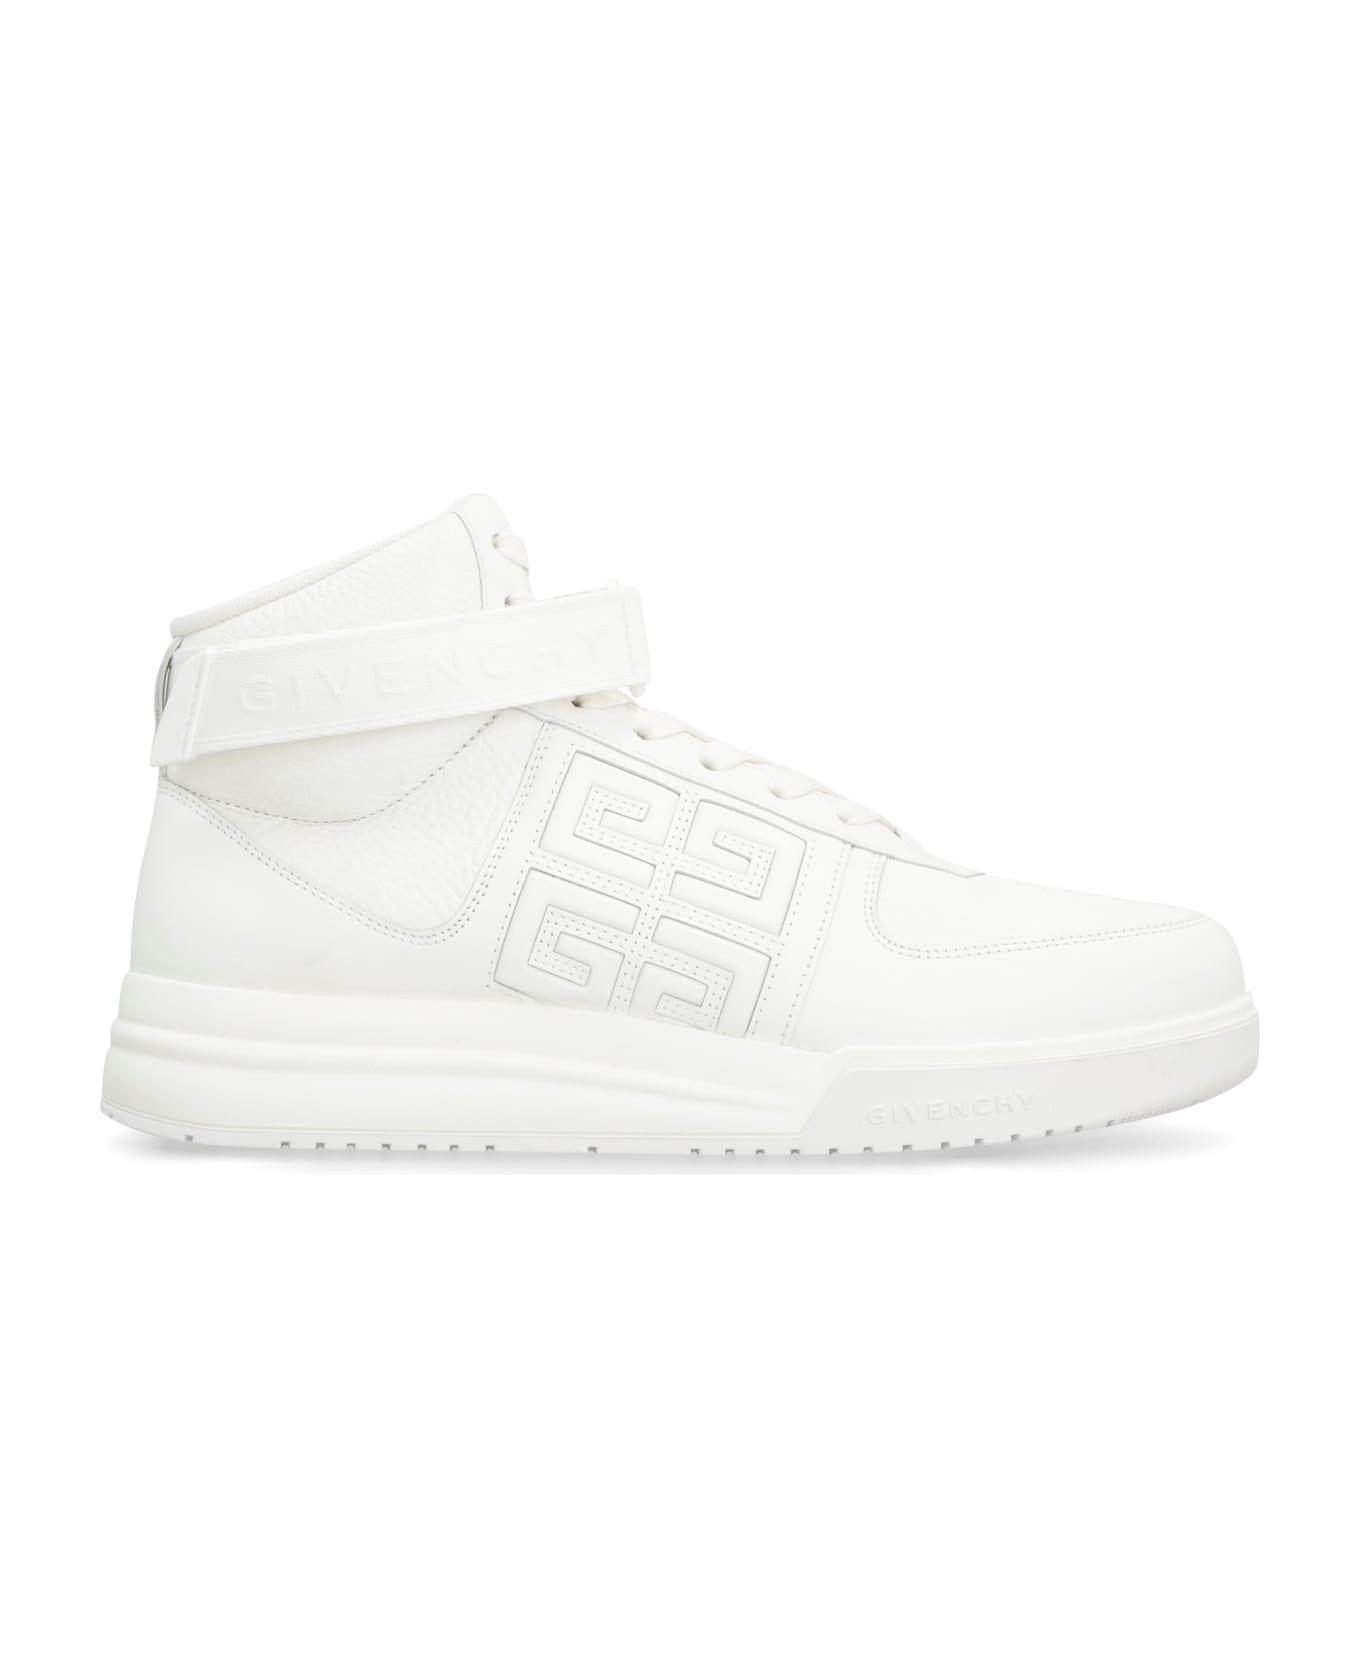 Givenchy G4 Sneakers - White スニーカー